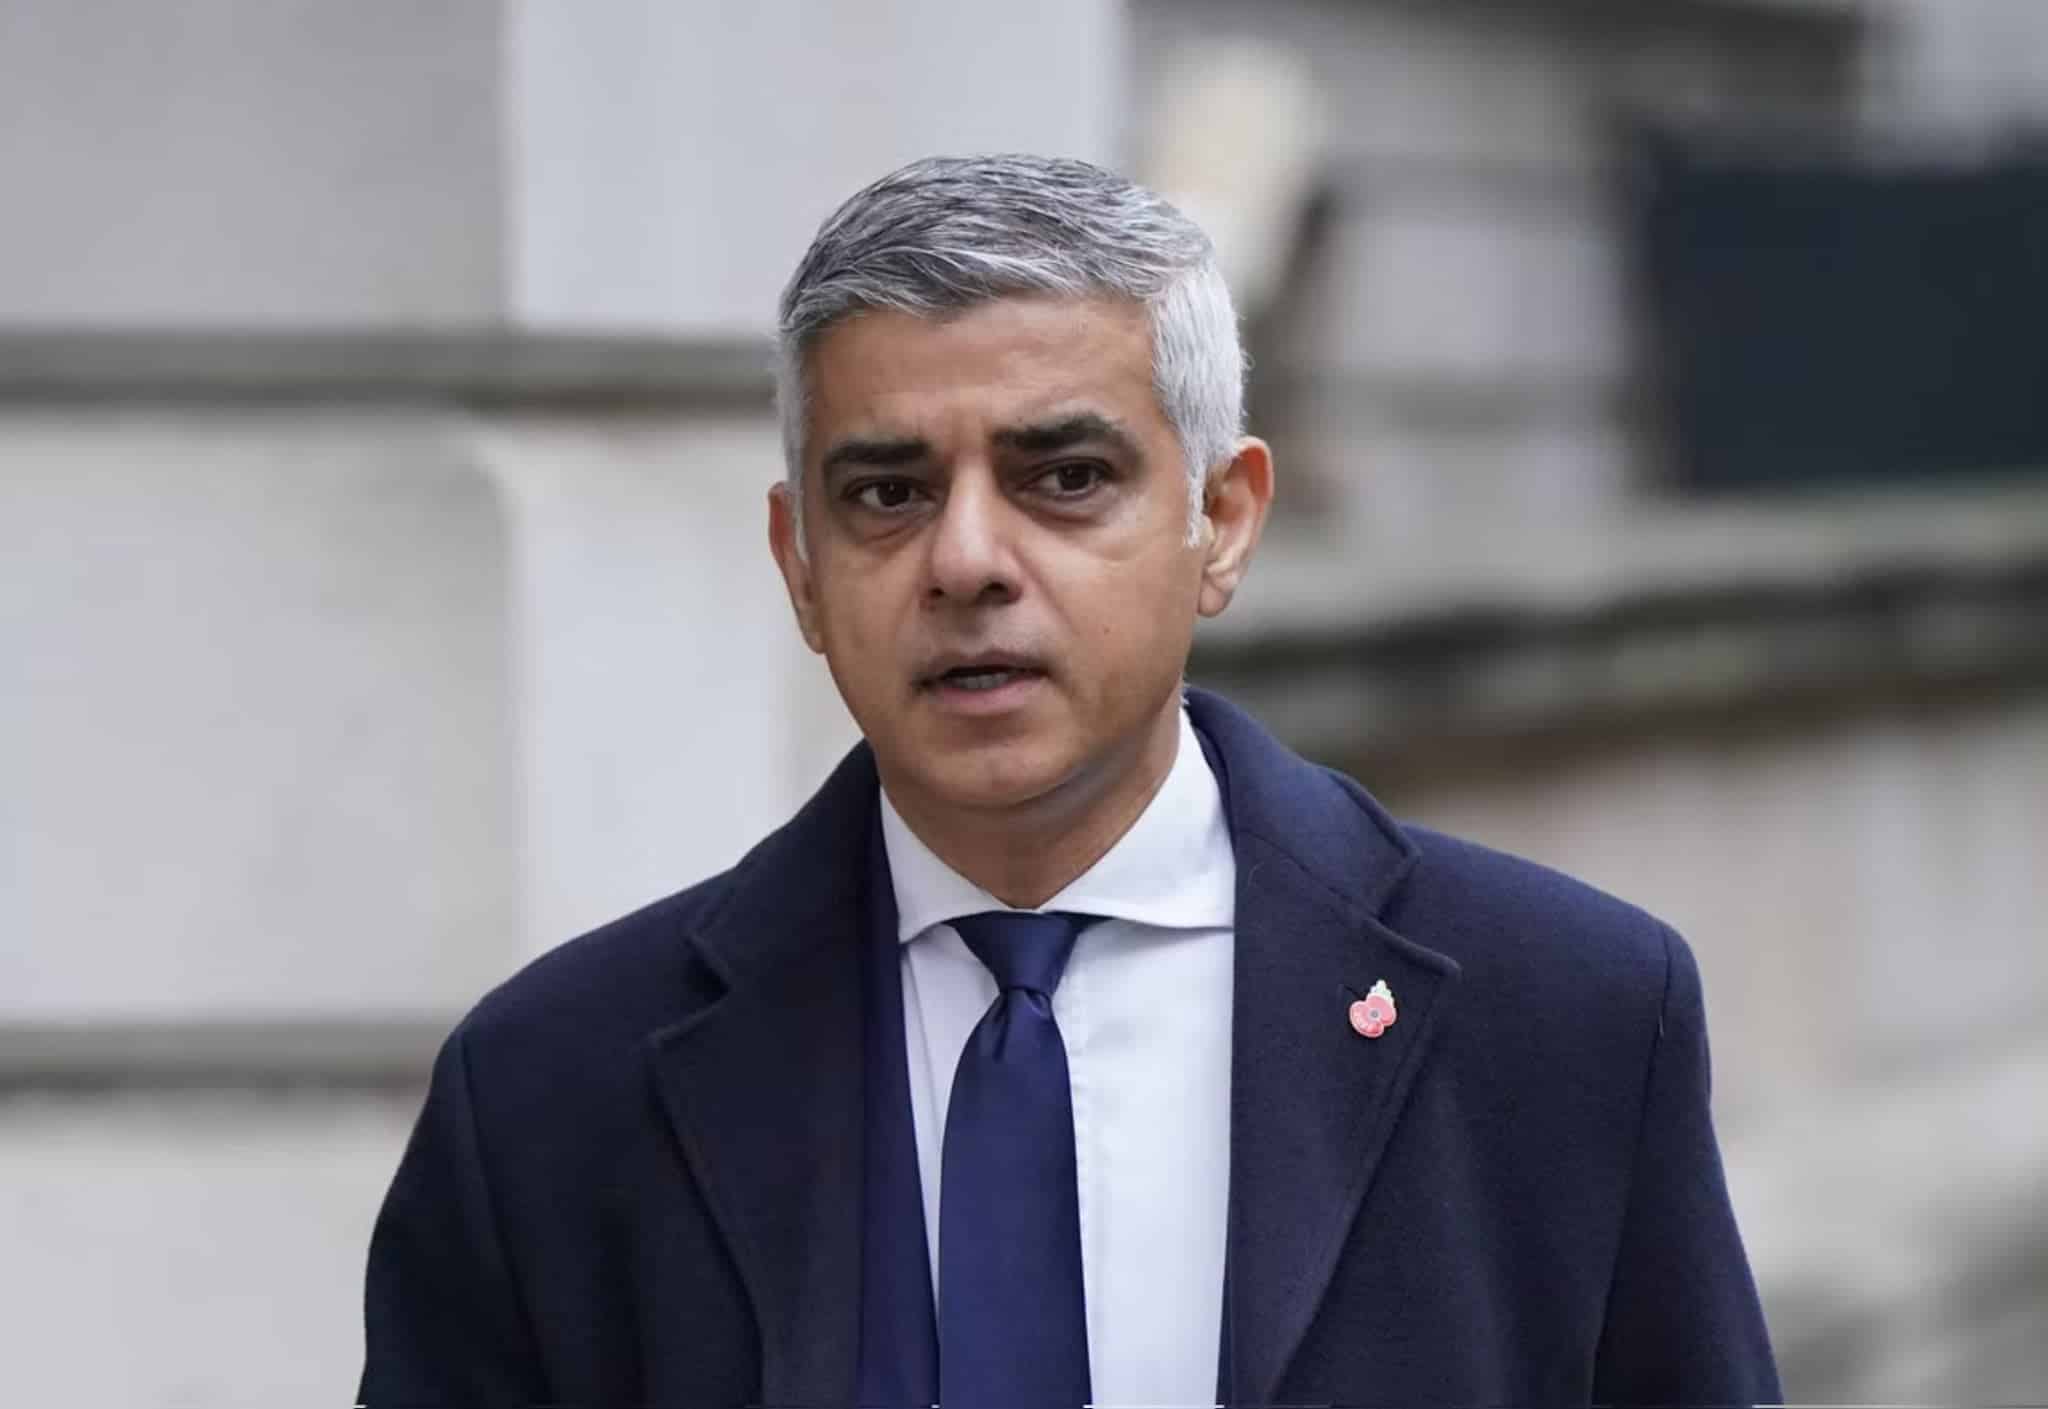 Mayor of London reacts to incident involving fans at Asake concert